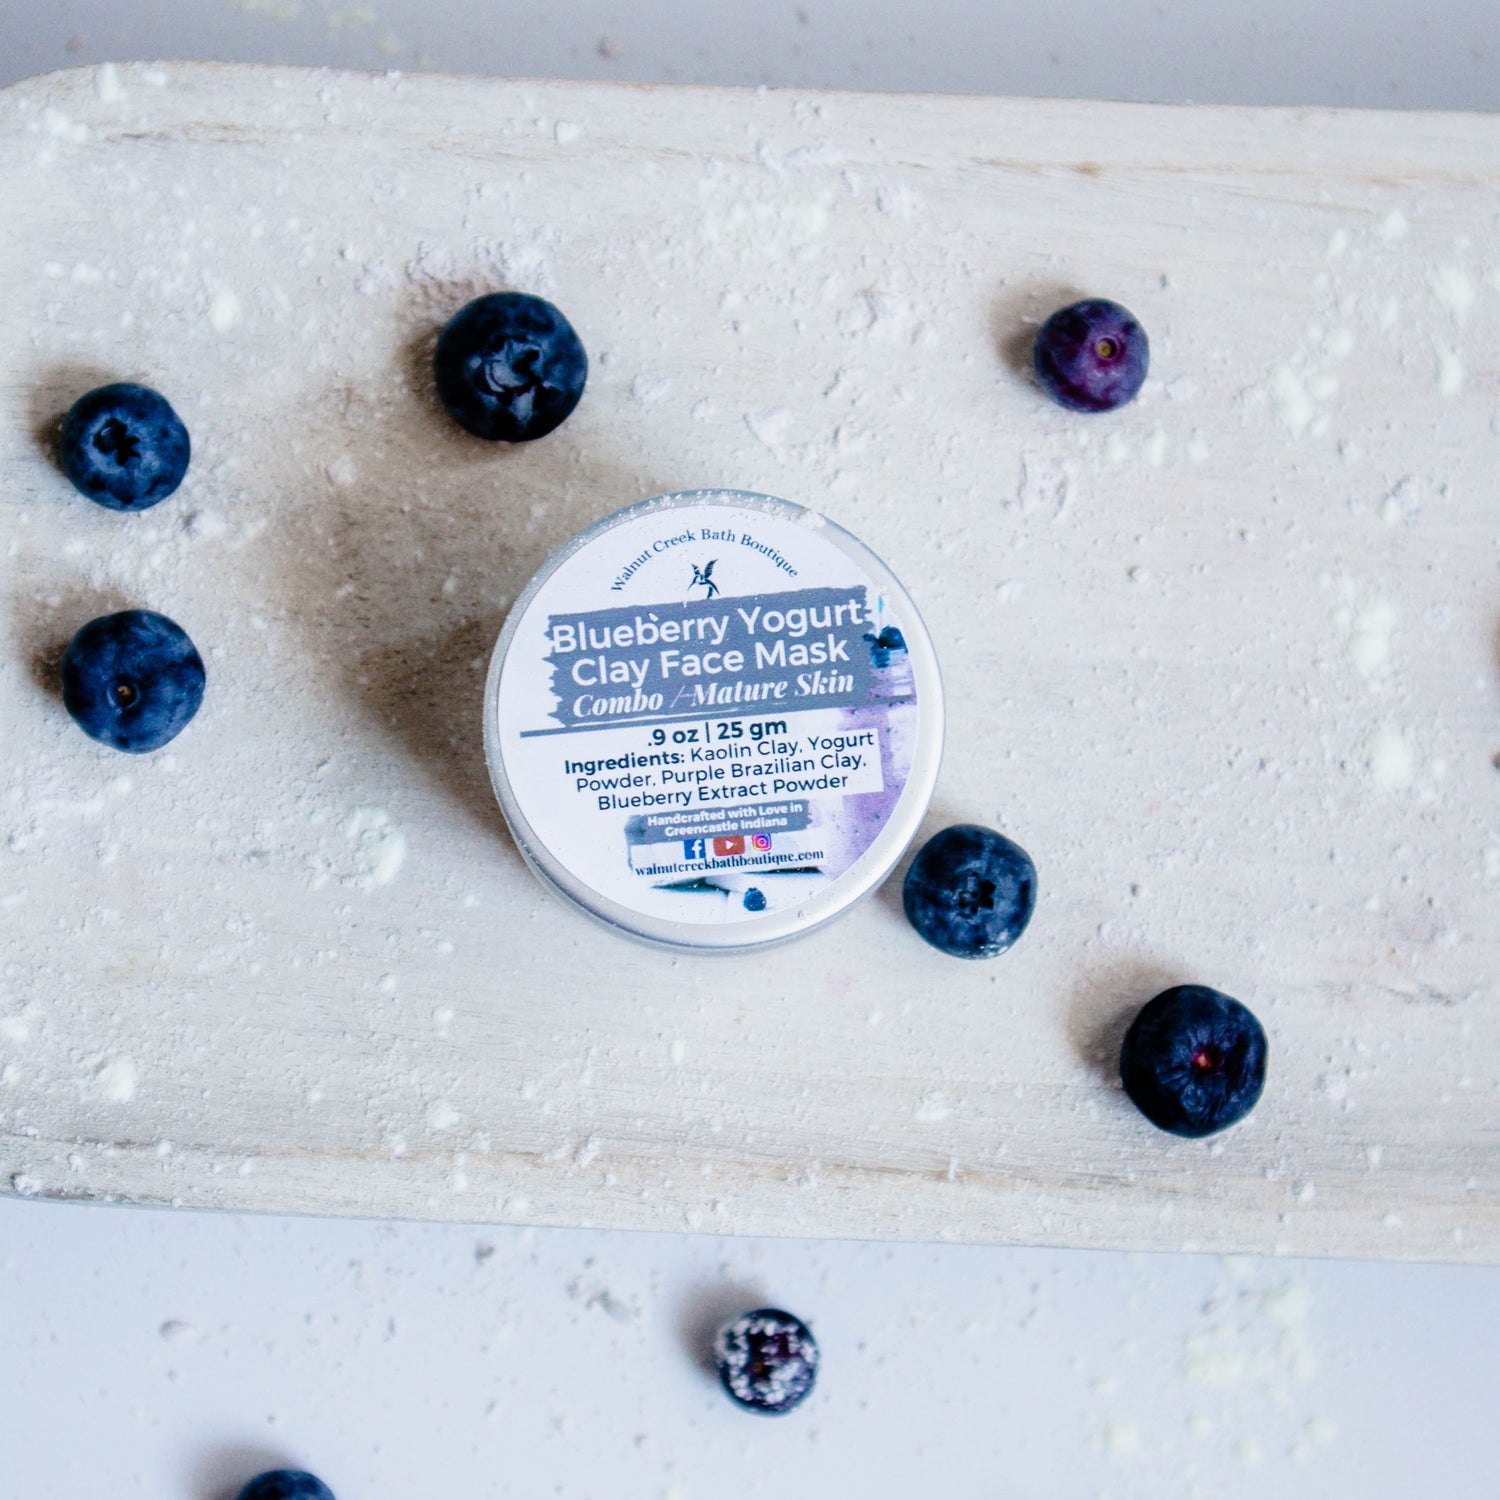 Blueberry yogurt clay face mask is a small glass jar. This is sitting on a wooden board with yogurt powder, clay mask powder and blueberries surrounding it.